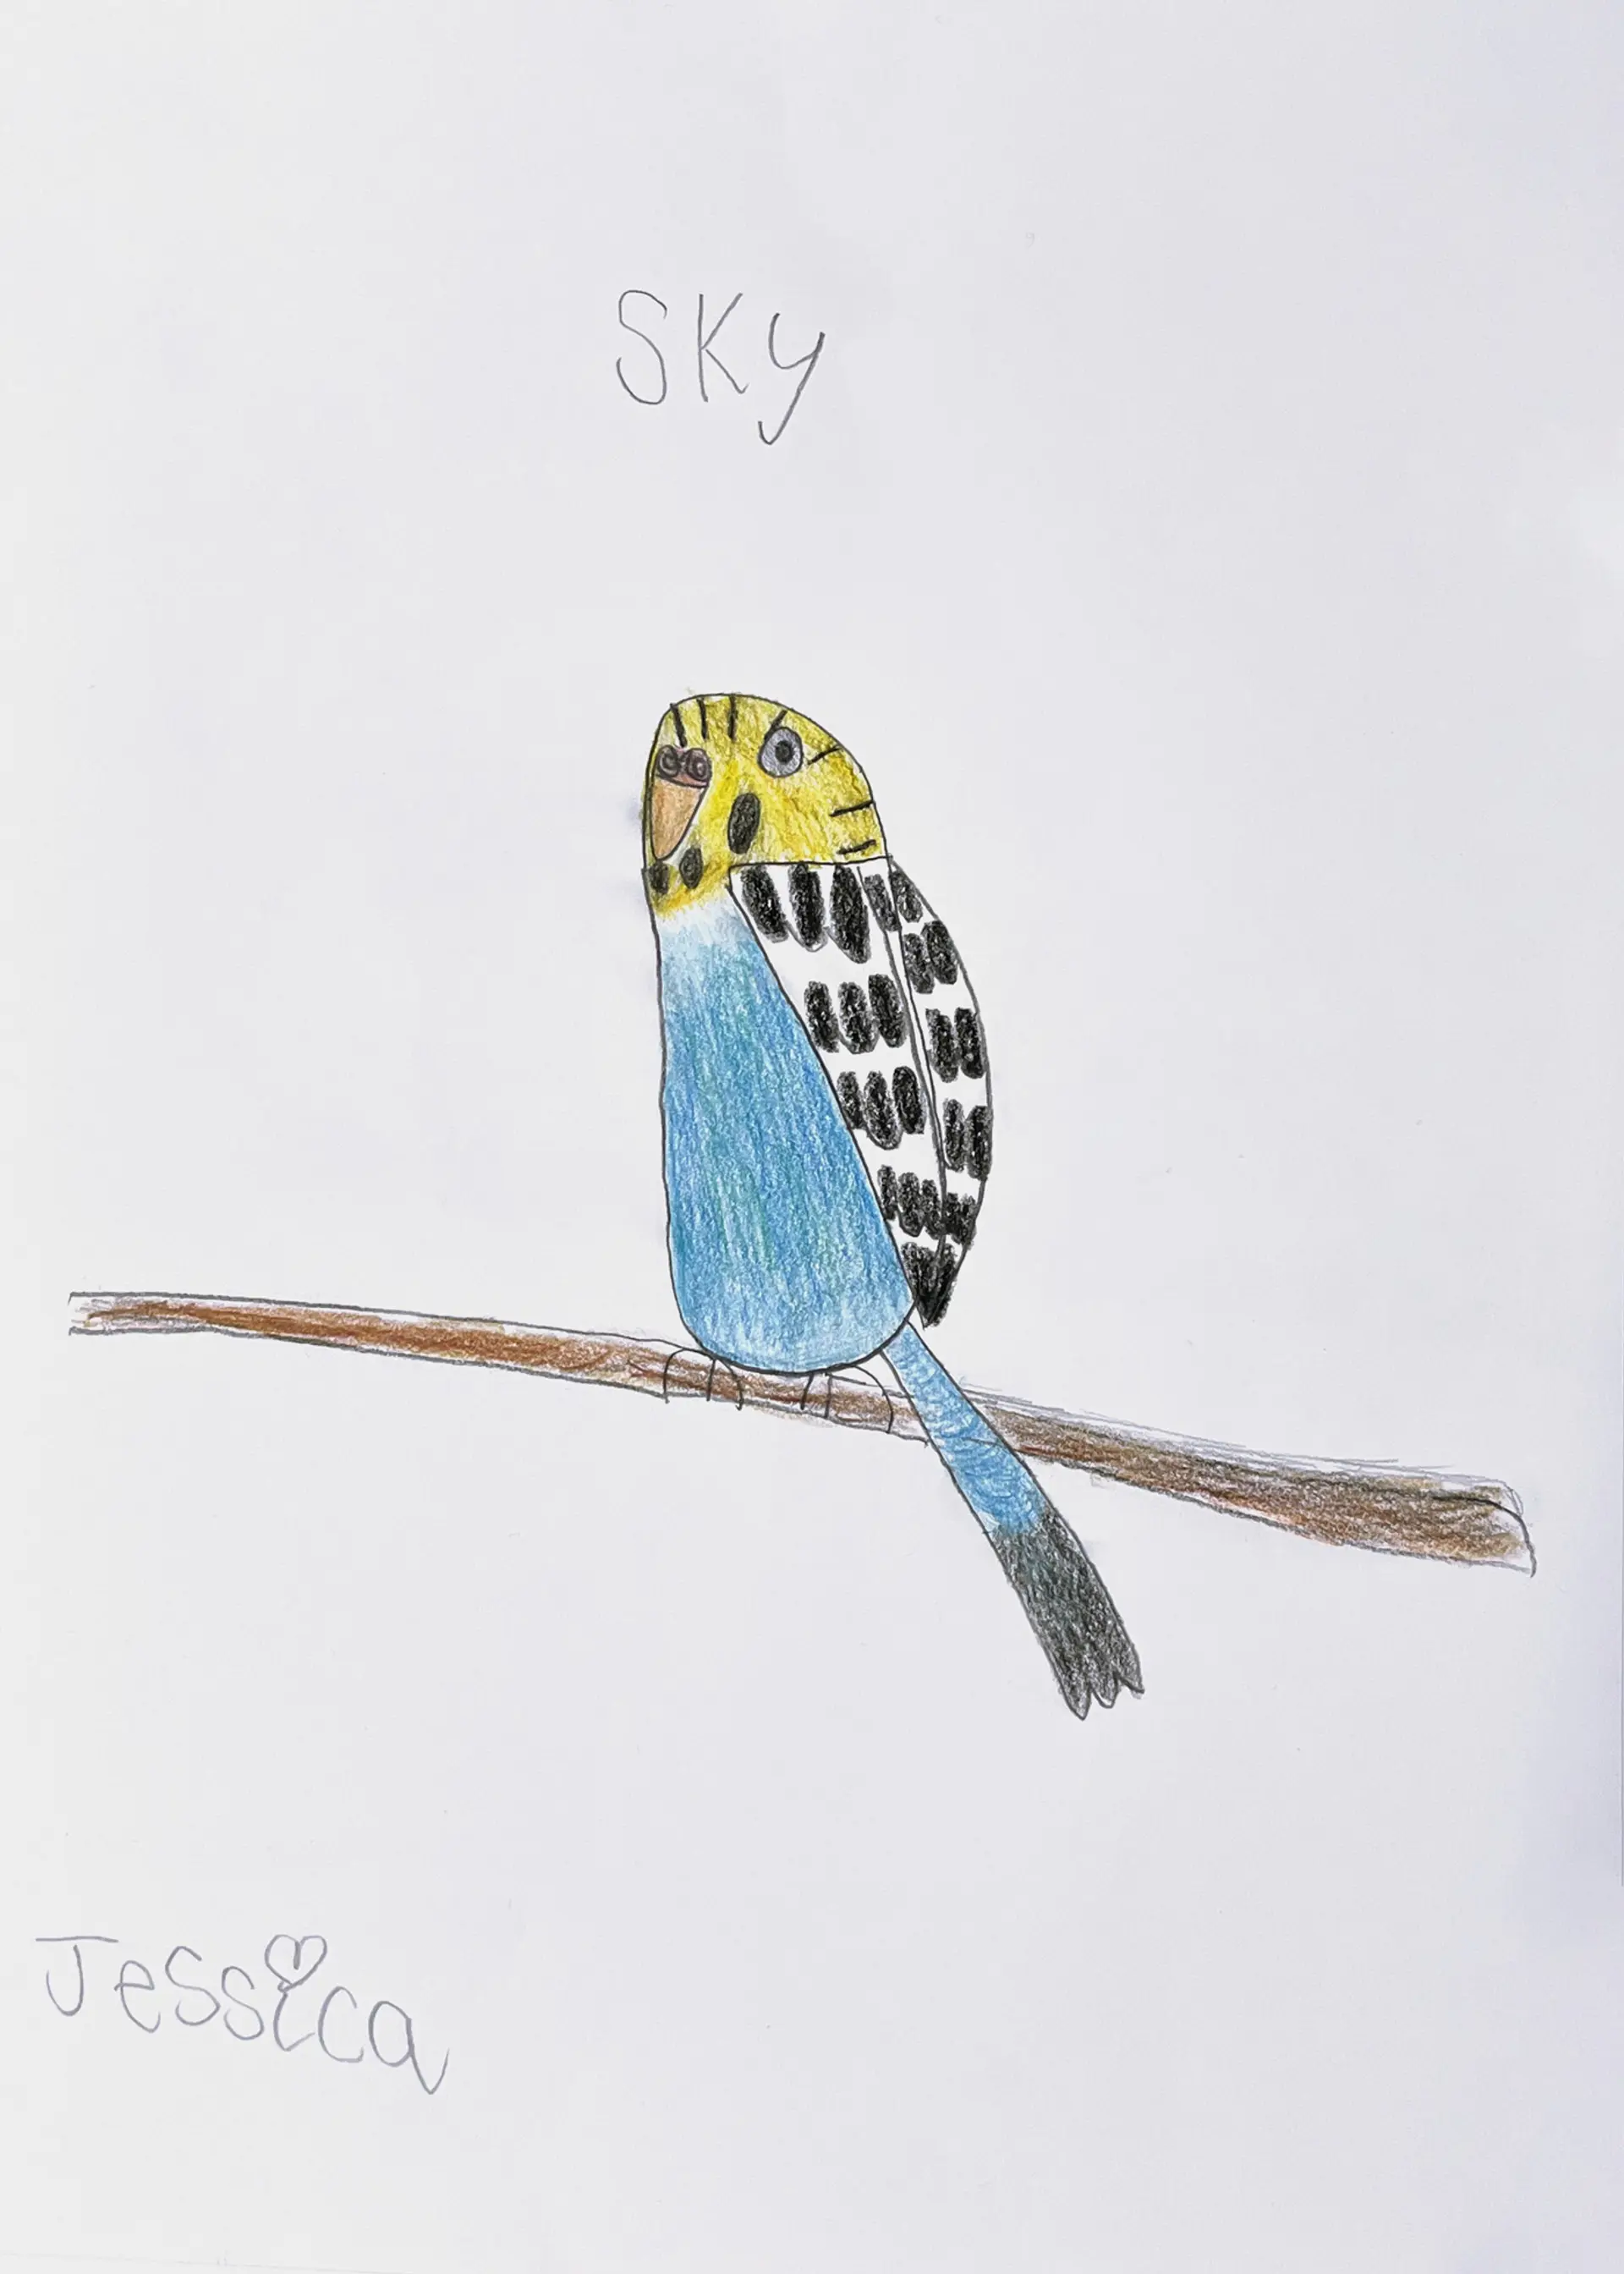 A coloured pencil drawing of Jessica’s pet Budgie bird, Sky. She is sitting on a branch, she has a blue body and a yellow head and is facing the viewer. Above the drawing her name is written ‘Sky’, and Jessica has signed the drawing in the bottom left of the paper. 